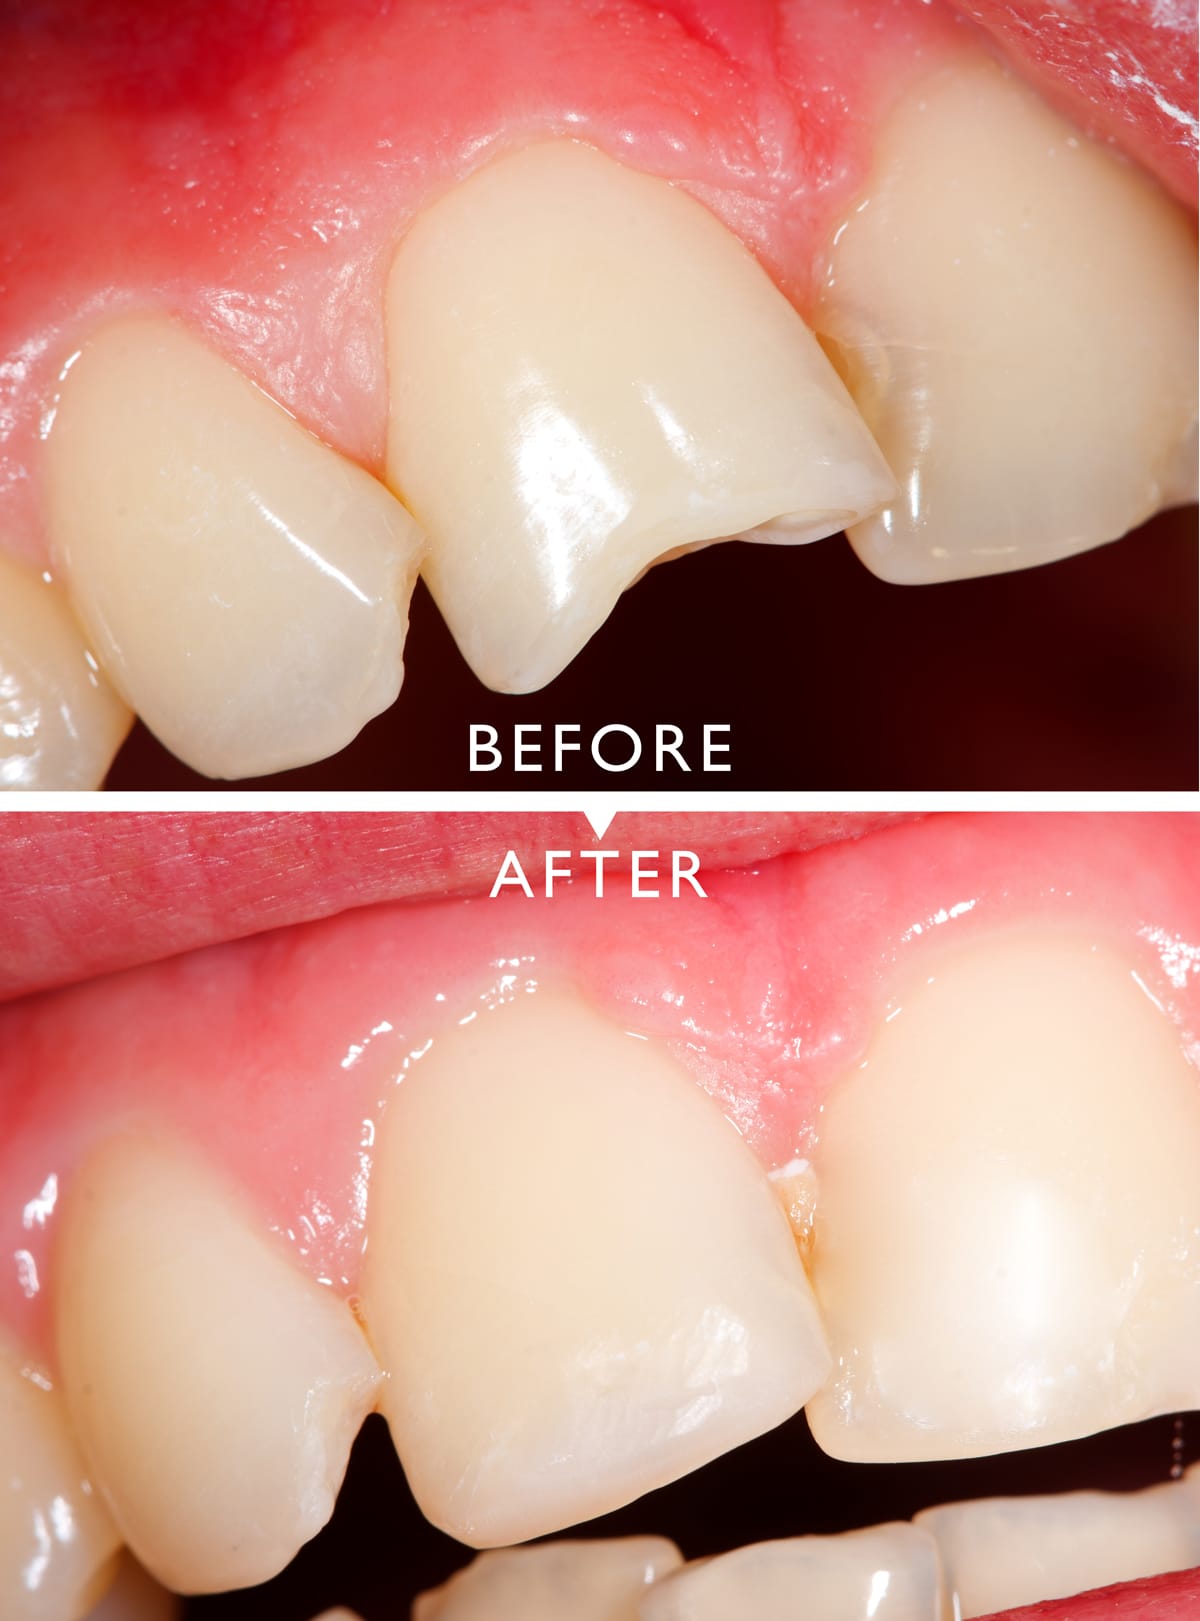 Before & After Photos, Cracked Tooth Repair Gallery